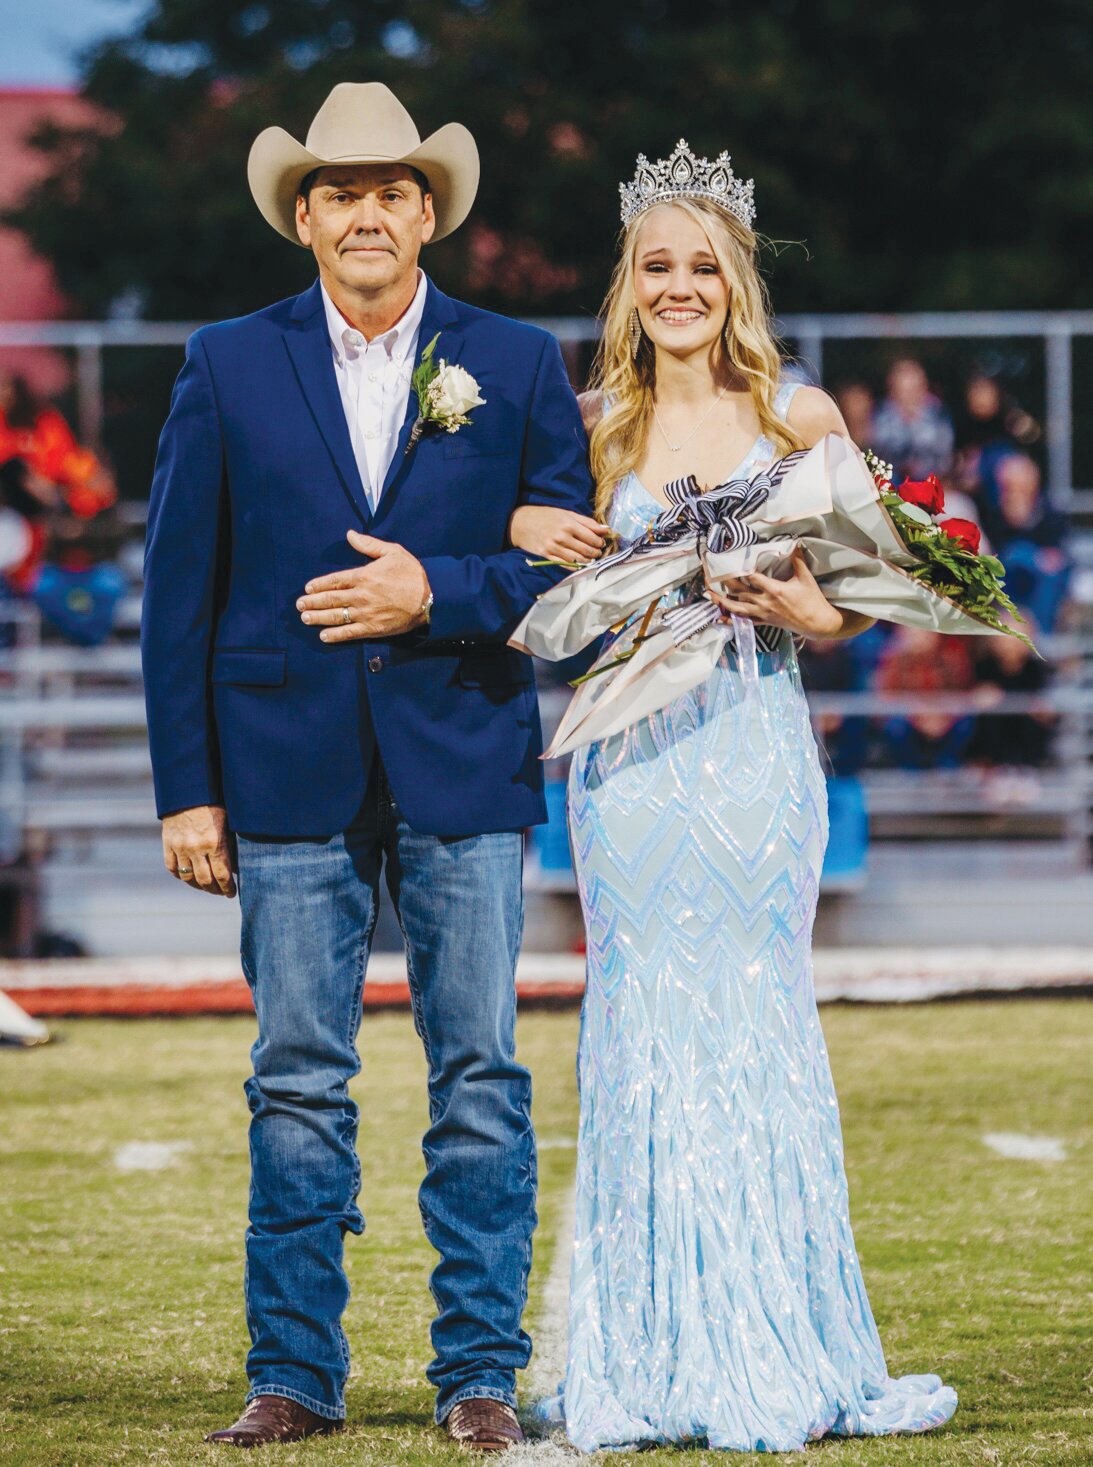 Huntsville Senior, Faith Thomas, was named the 2023 Huntsville High School Homecoming Queen. She was escorted by her father, Danny Thomas.